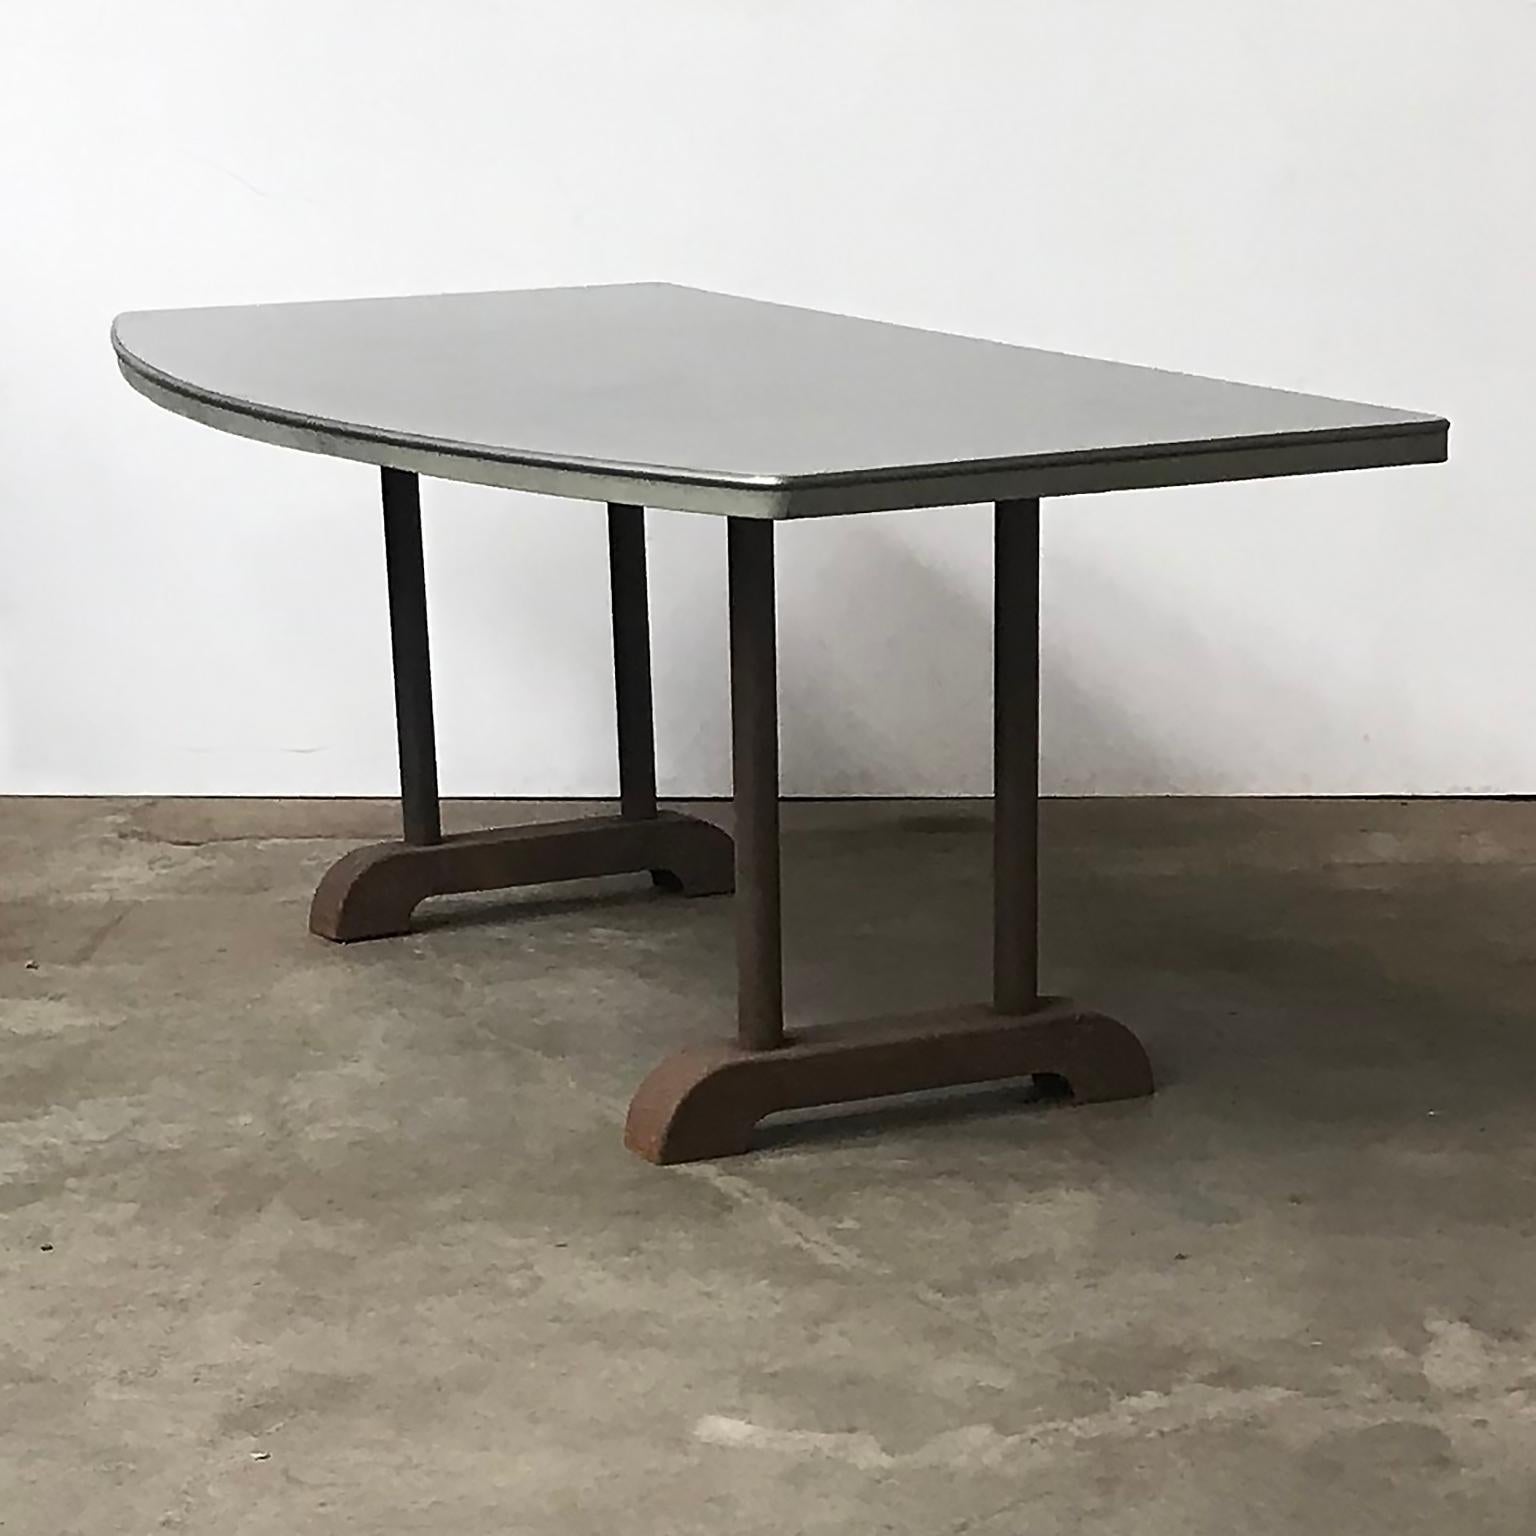 Industrial Reception Table. Only Top 600 euro. The top has a very special and unique shape. The legs give the table an industrial look. The table on the picture is just an example of the many tops we have in store. All tops show traces of wear like